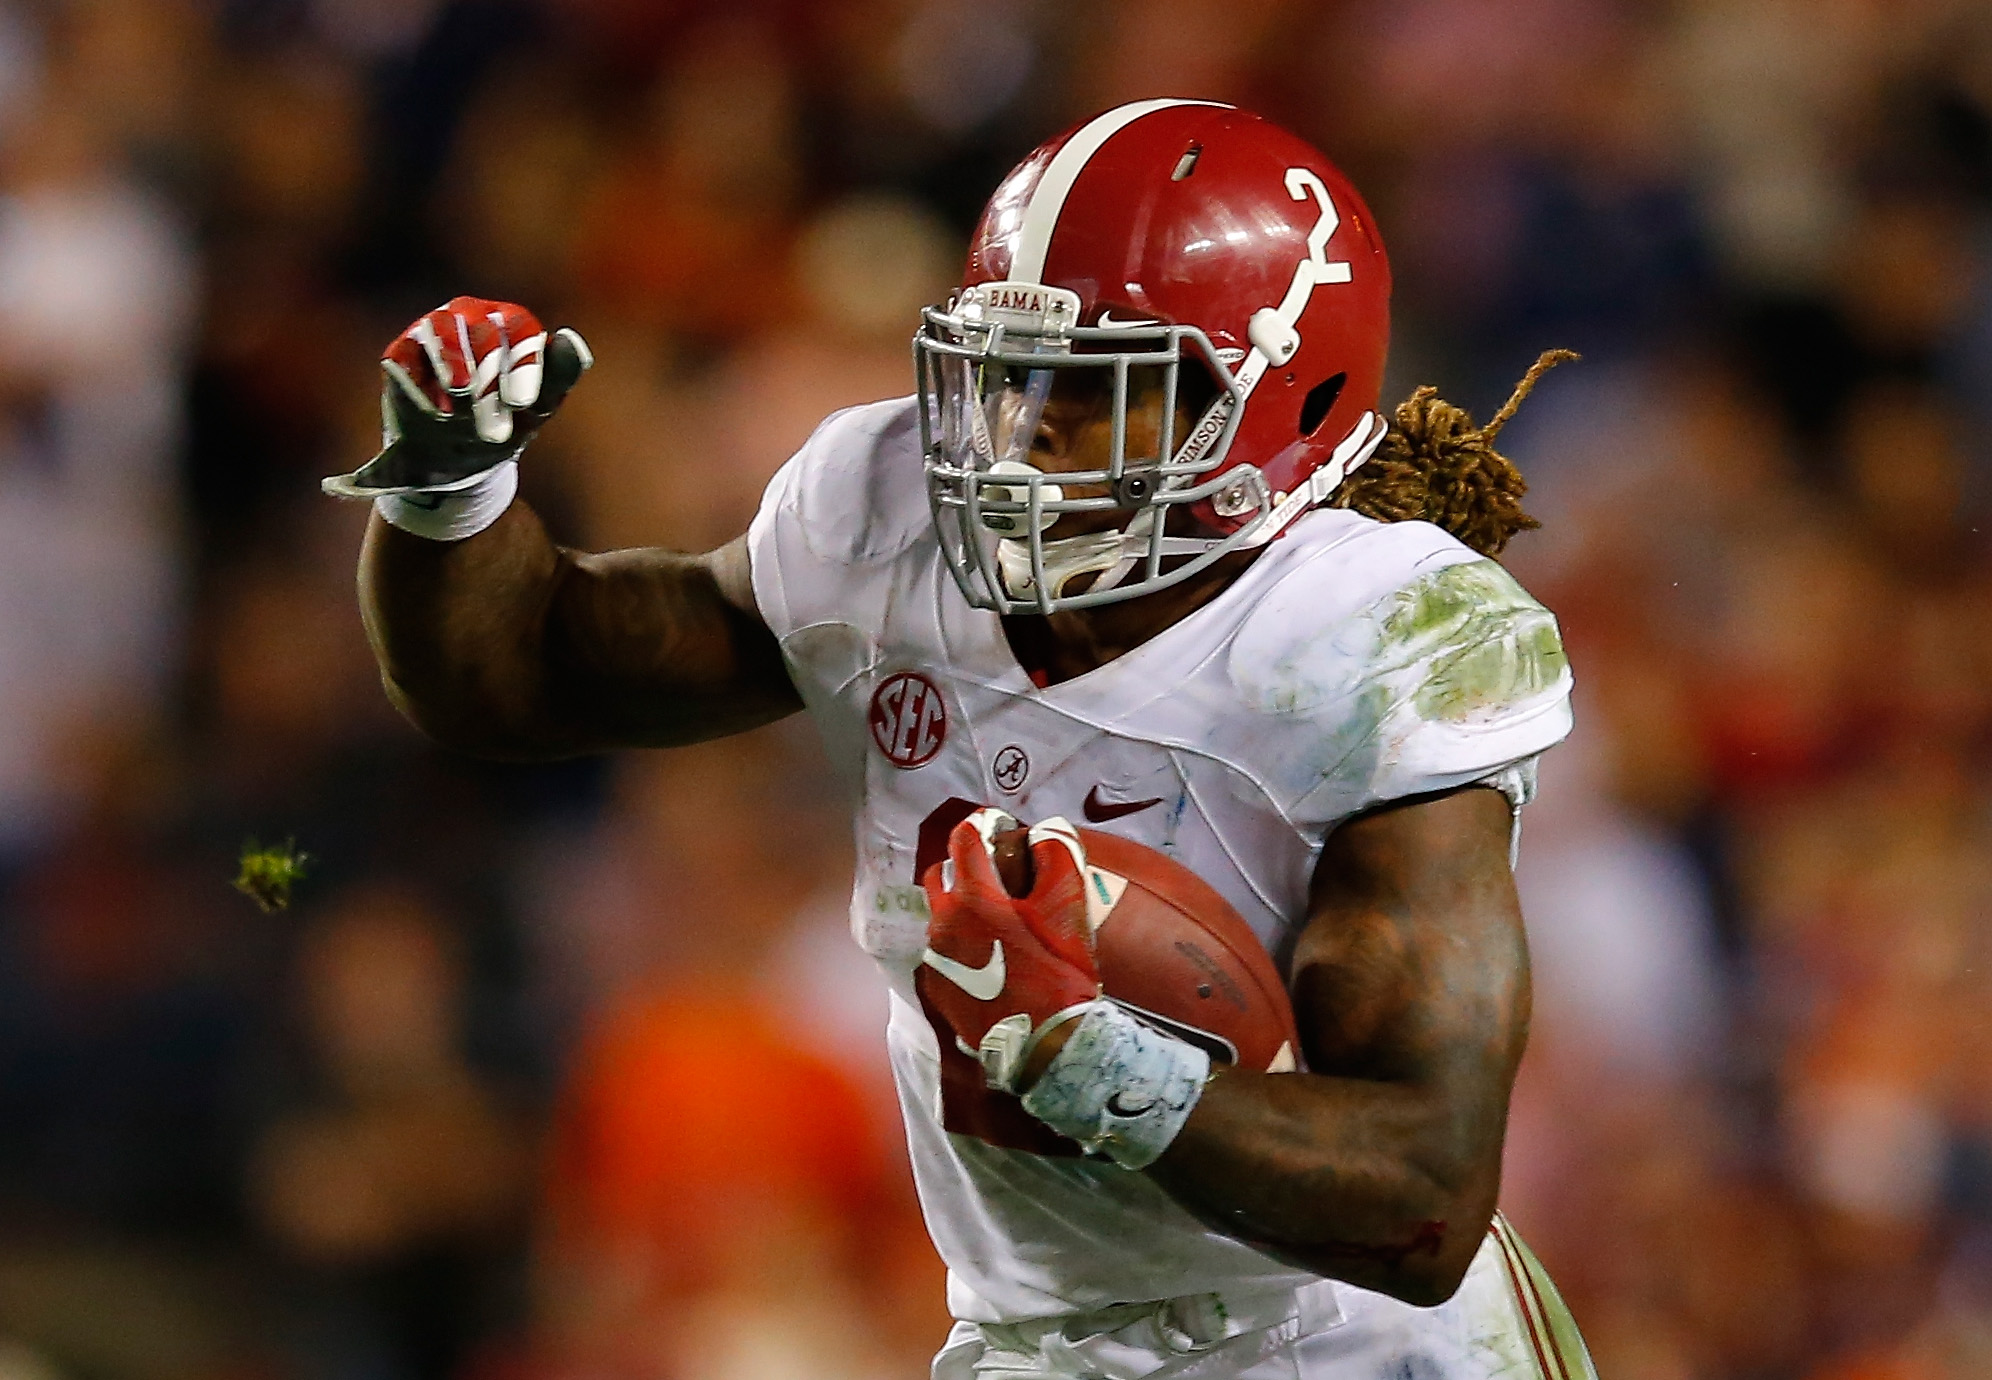 Derrick Henry #2 of the Alabama Crimson Tide rushes against the Auburn Tigers at Jordan Hare Stadium in Auburn, Alabama on Nov. 28, 2015. (Kevin C. Cox—Getty Images)